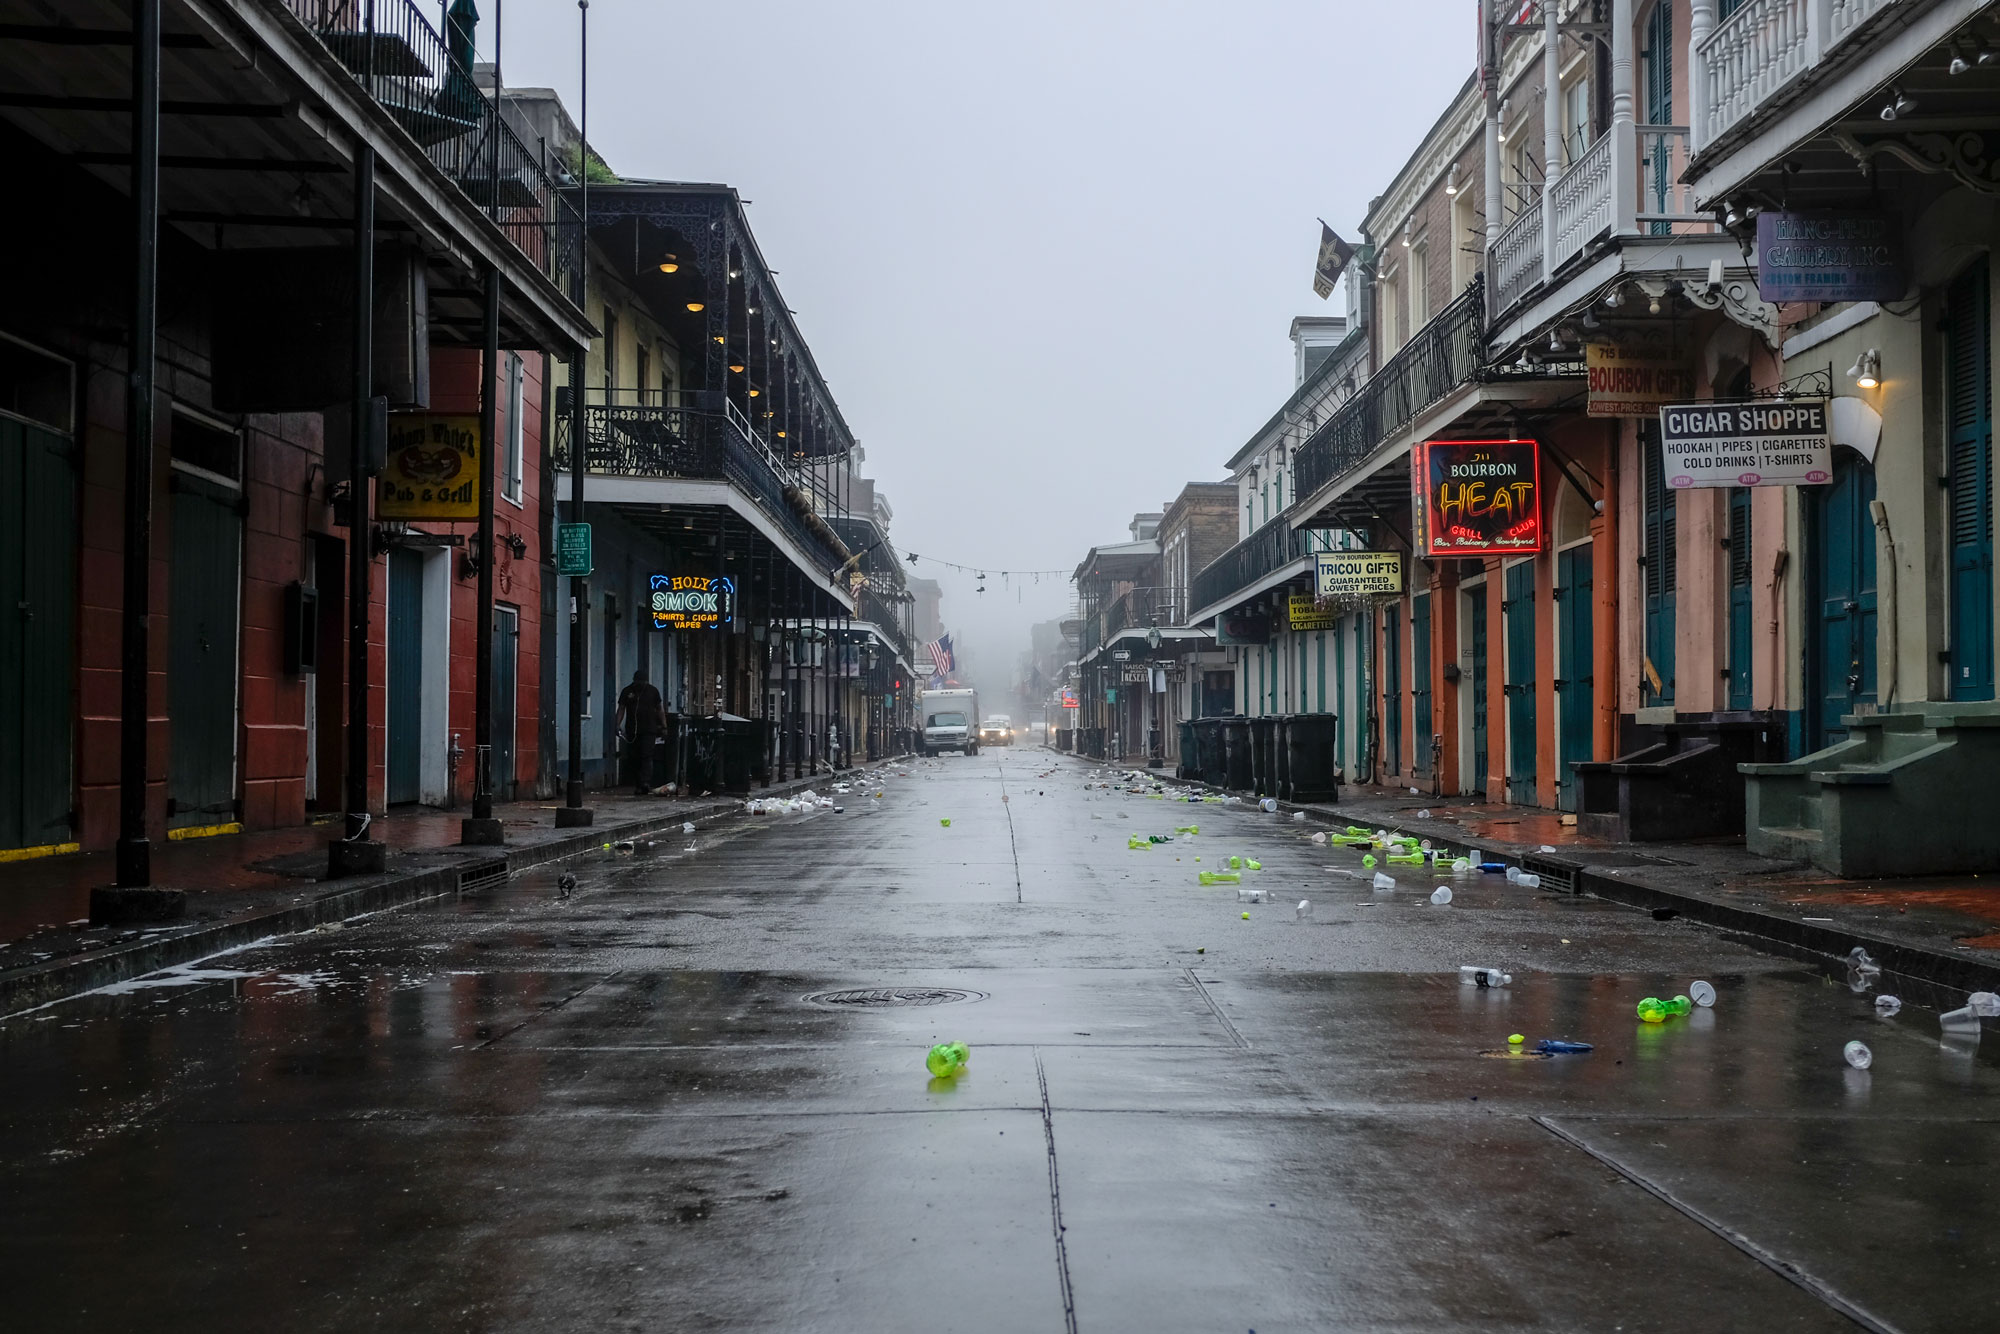 Bourbon Street early in the morning with lots of litter 